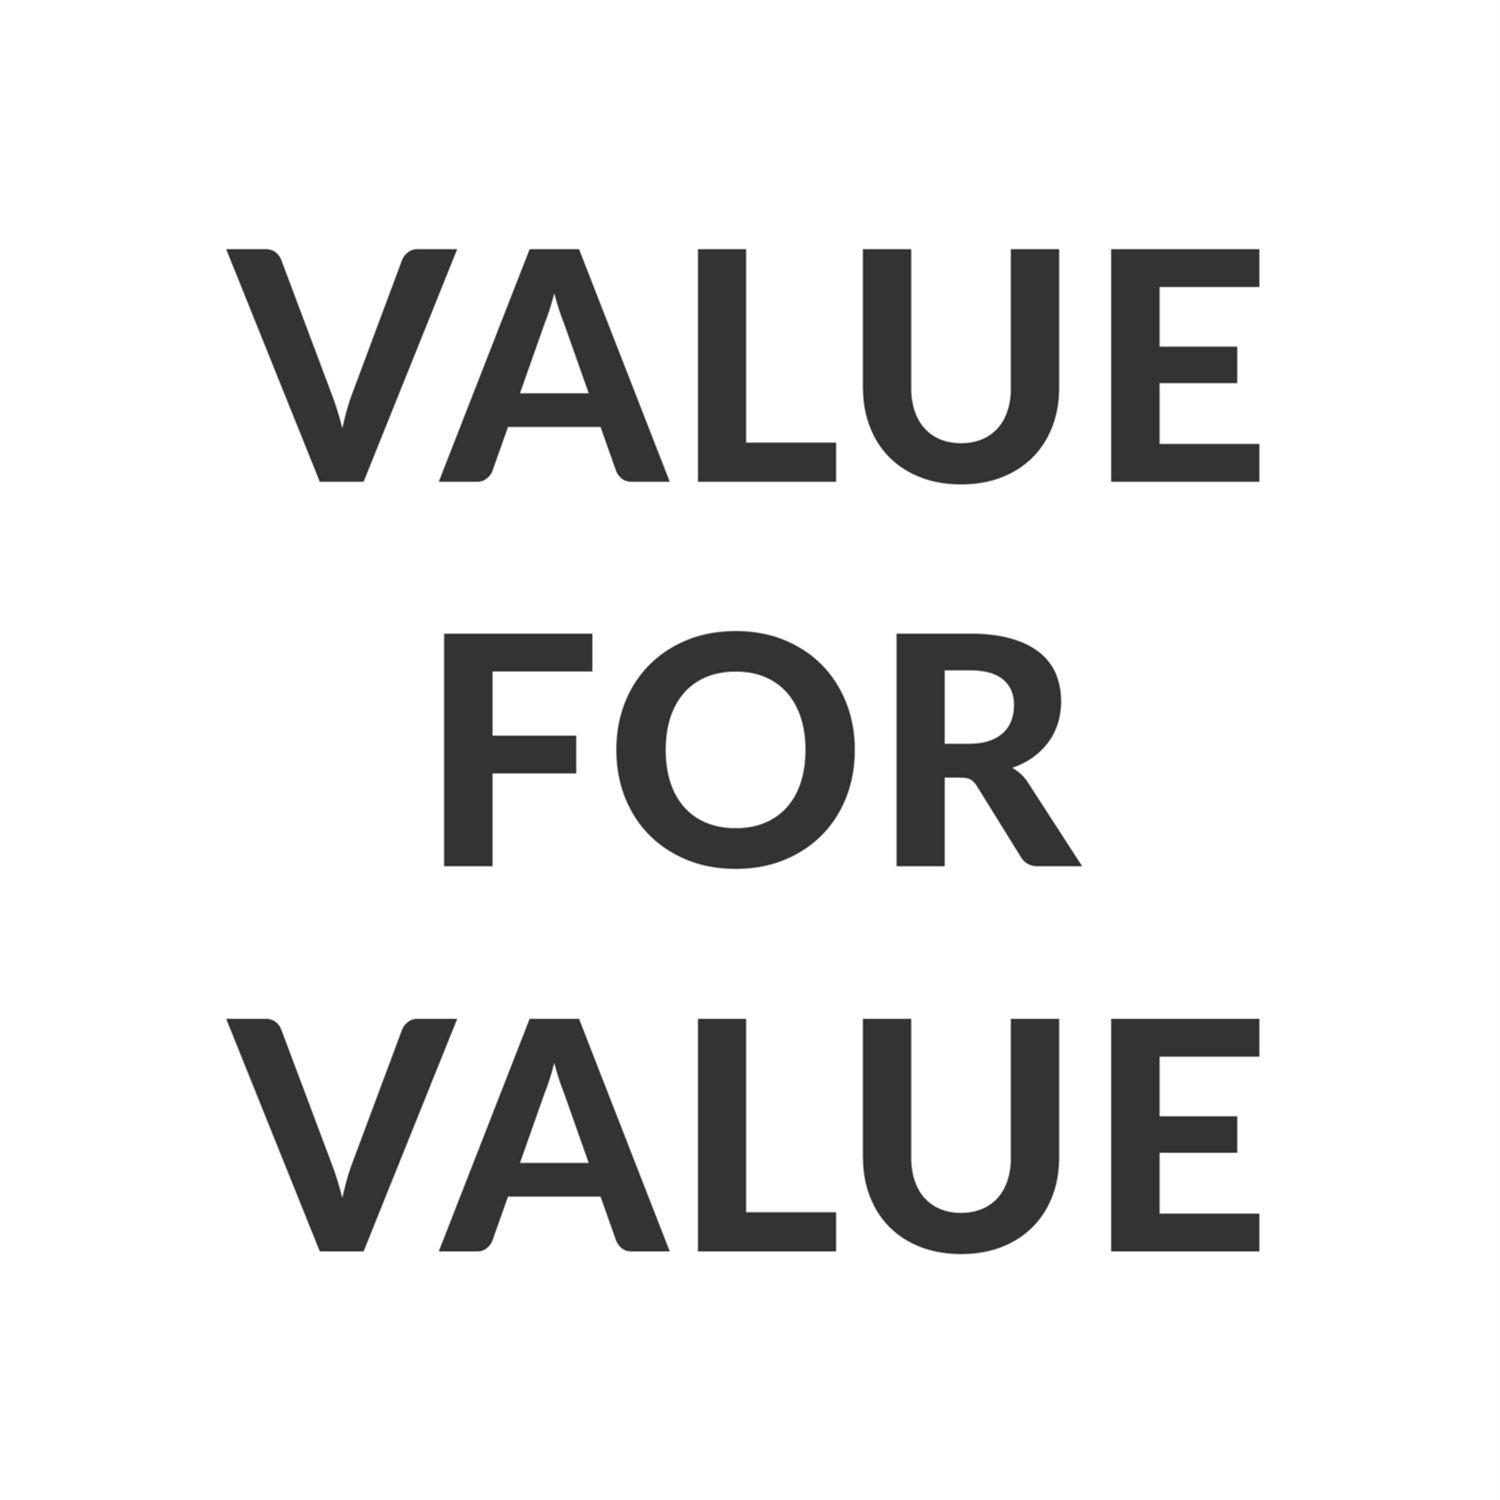 What is value for value?